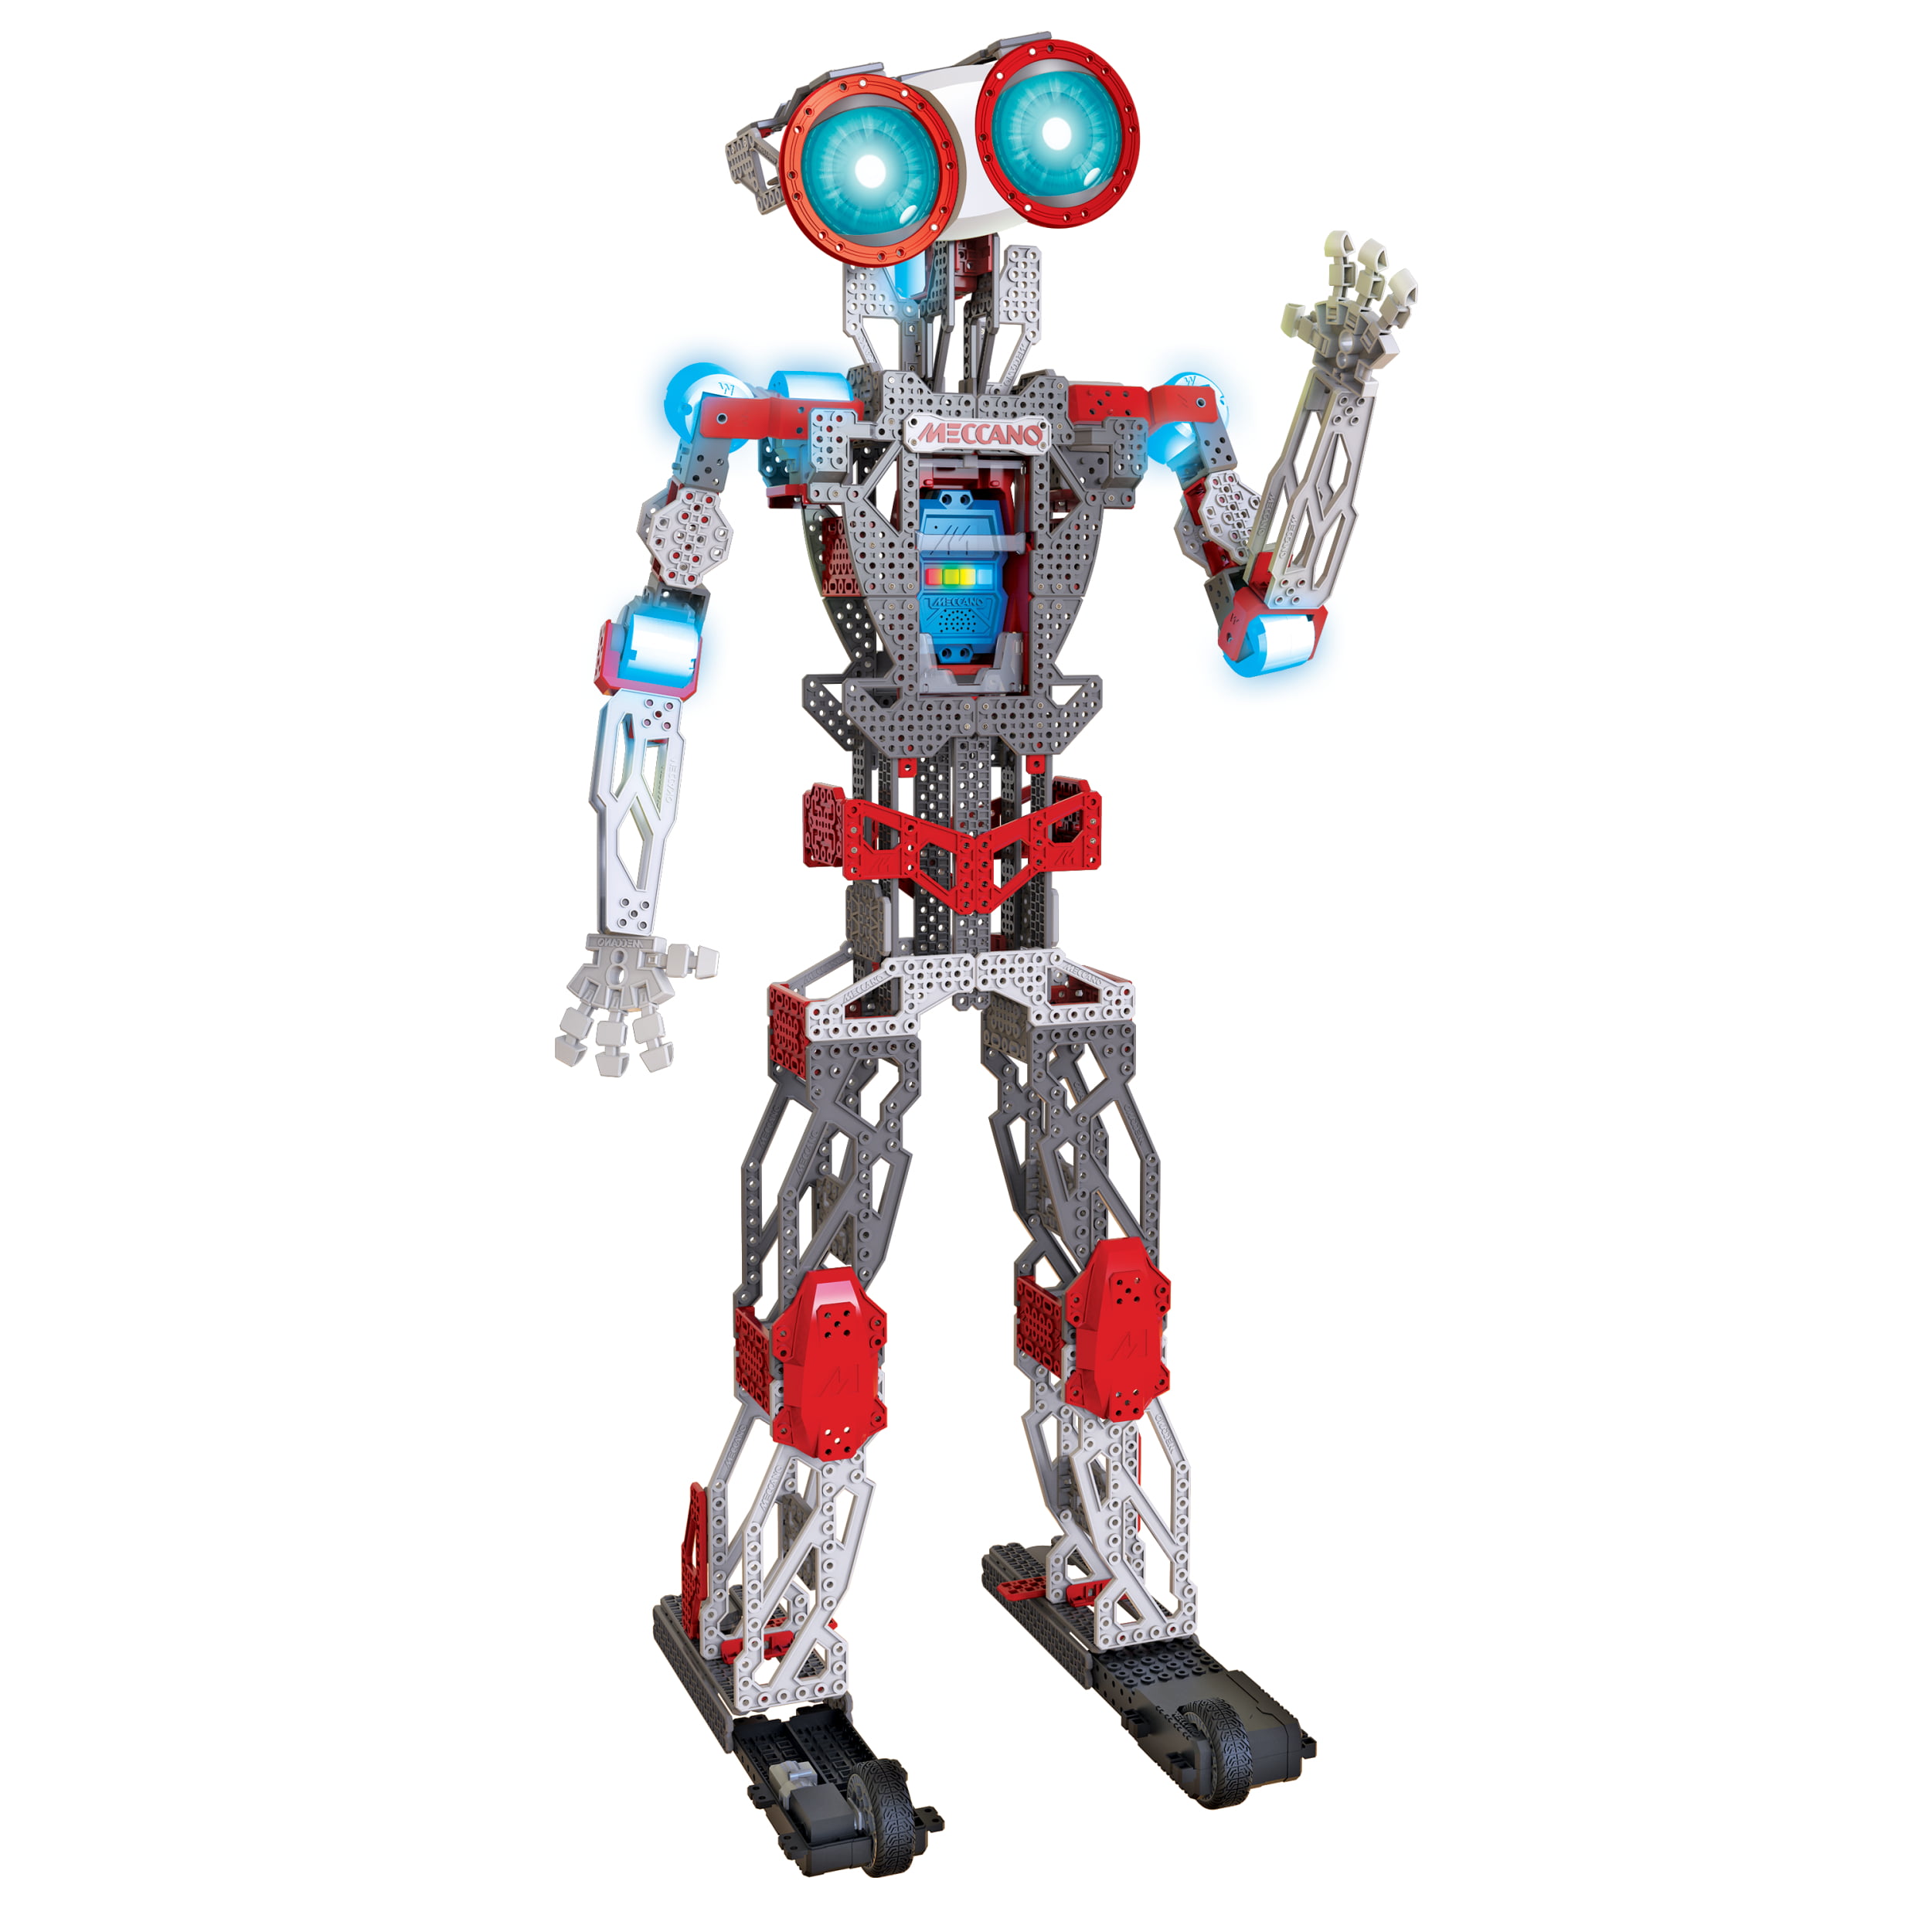 Erector By Meccano Meccanoid Xl 2.0 Robot-Building Kit Stem Education Toy For A 